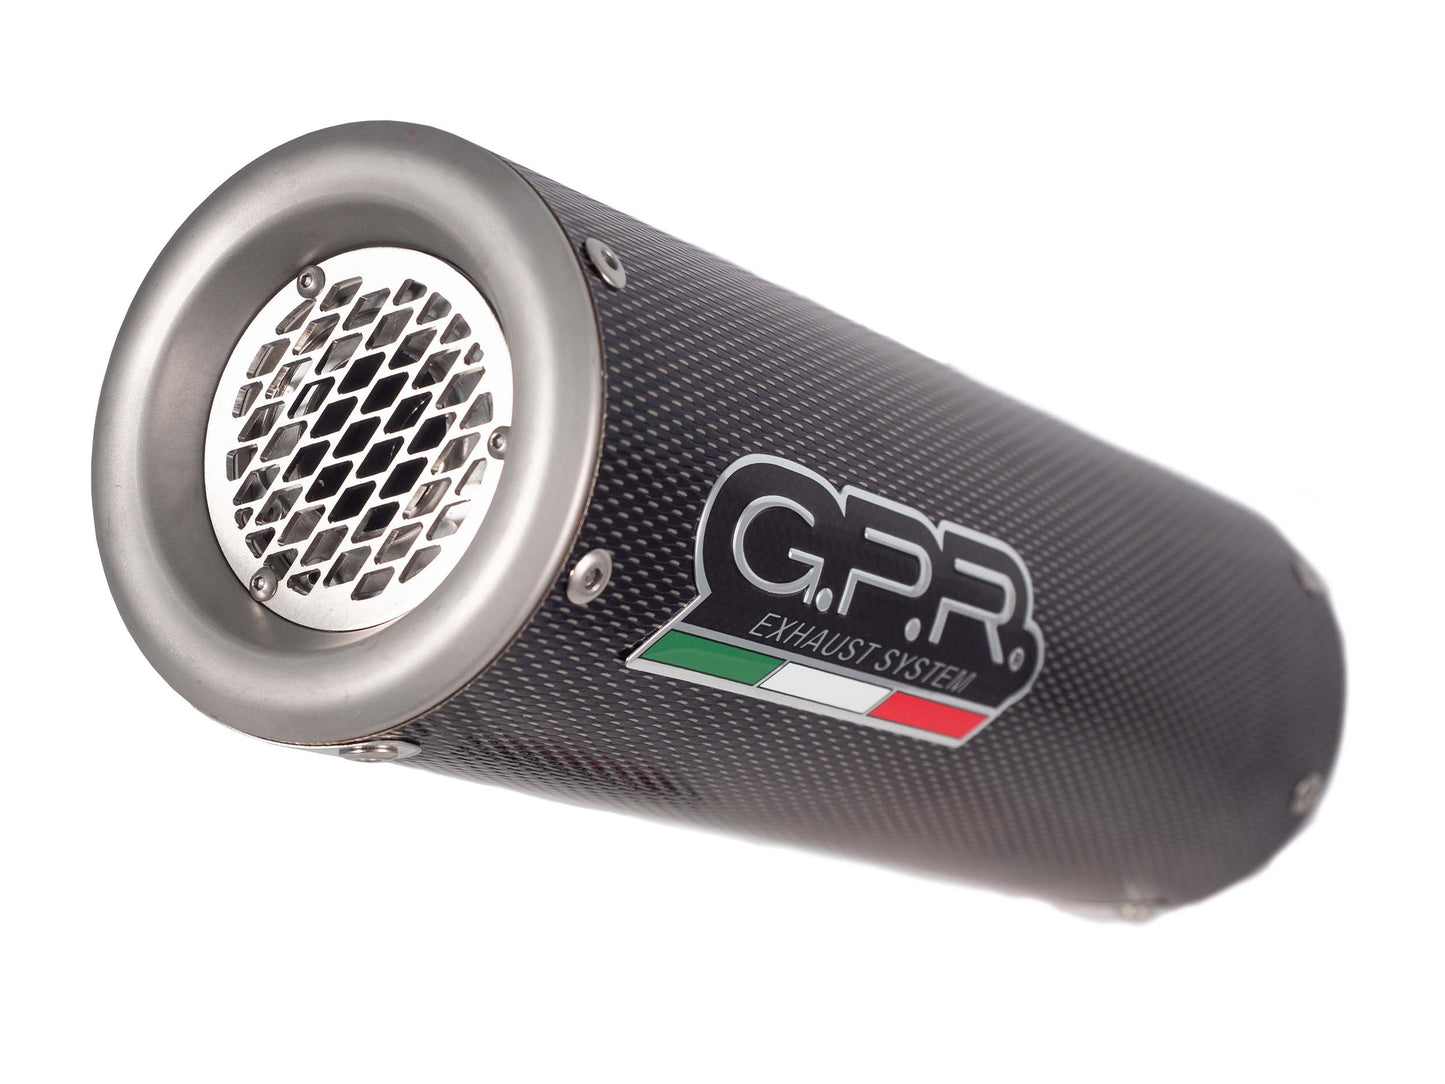 GPR Exhaust for Aprilia Tuono V4 R - Std - Aprc 1000 2011-2014, M3 Poppy , Slip-on Exhaust Including Removable DB Killer and Link Pipe